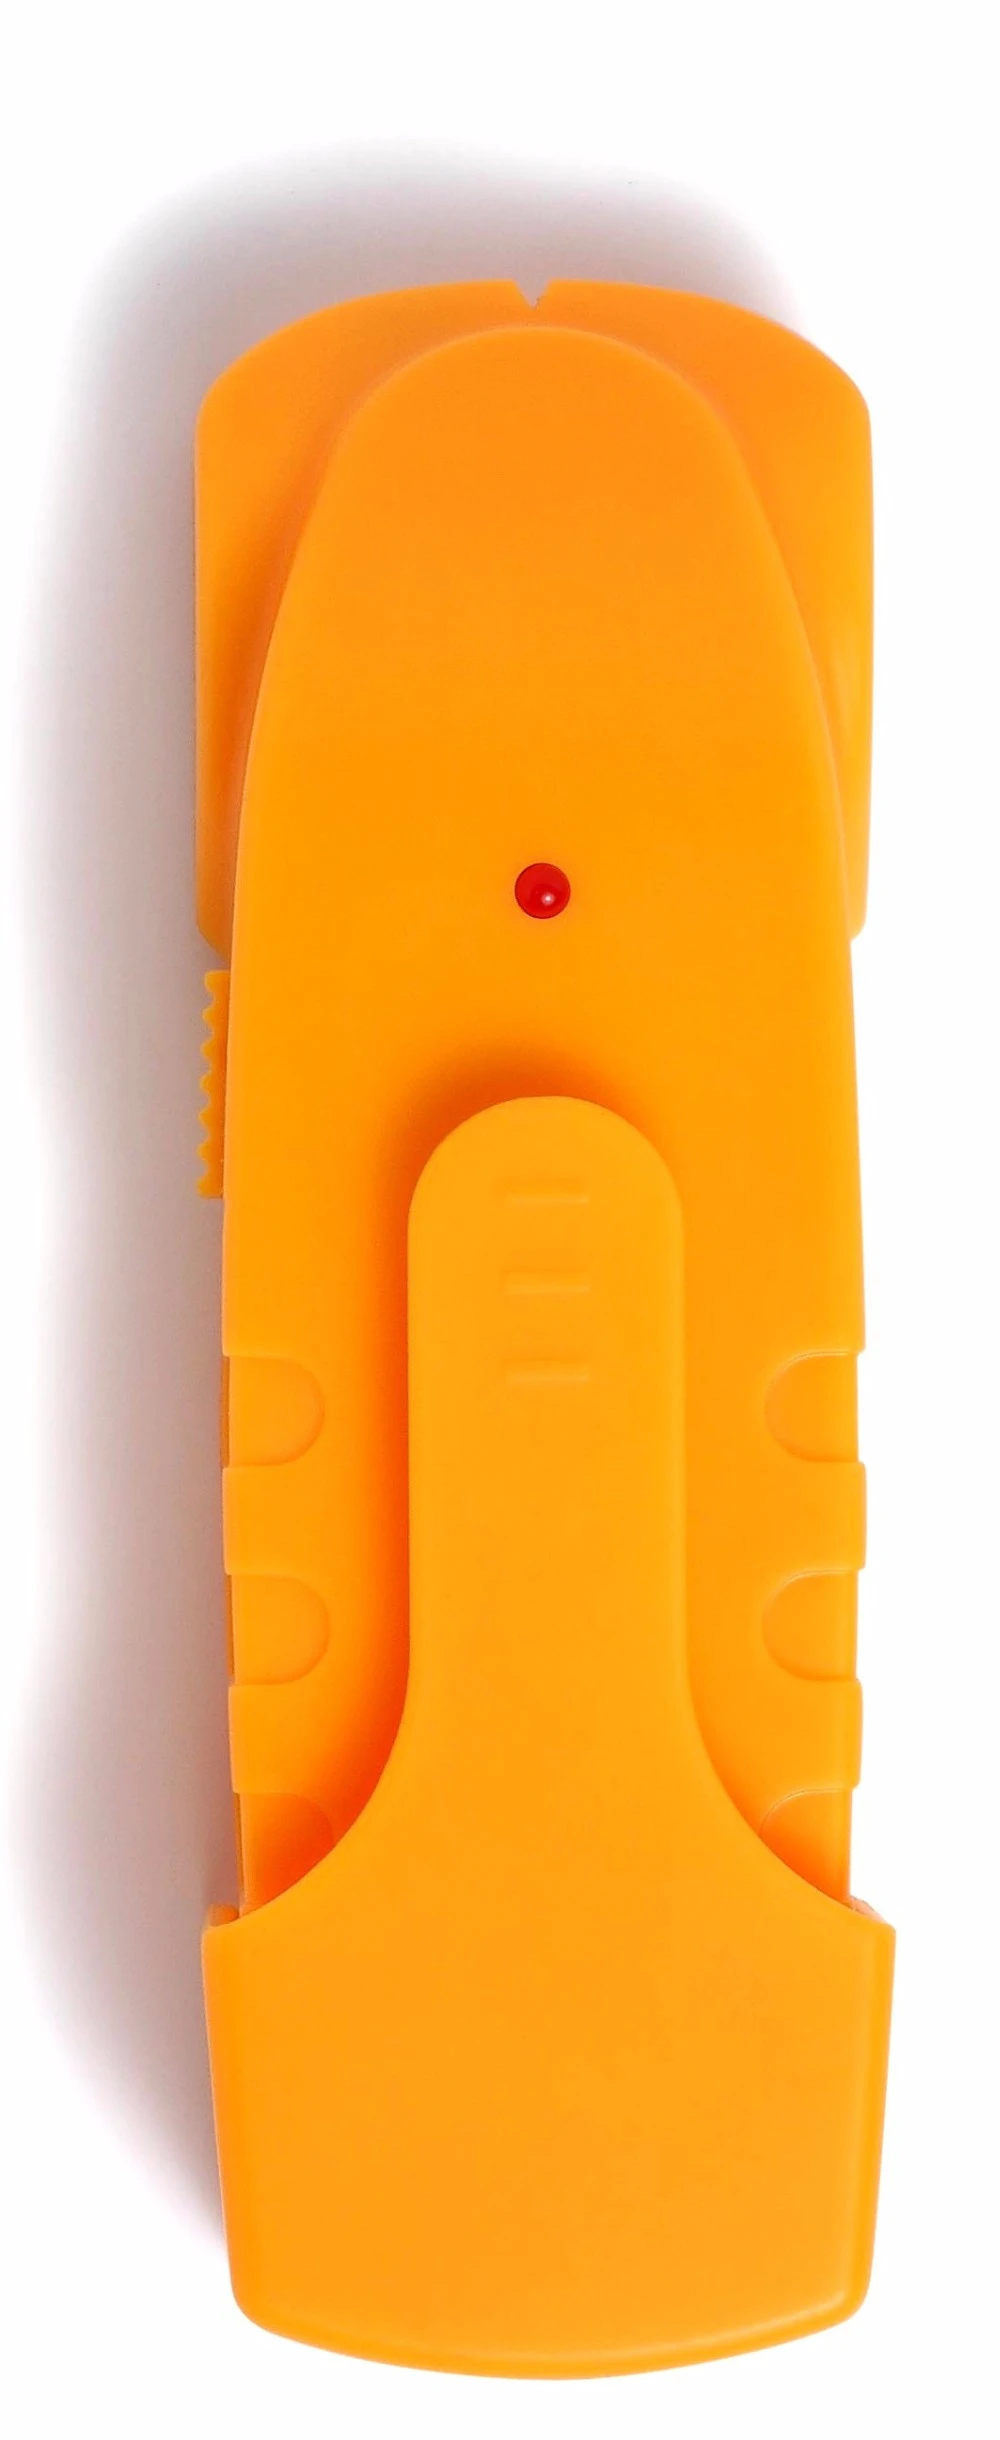 stud detection stud finder with 4 LEDs visual and audio indicator